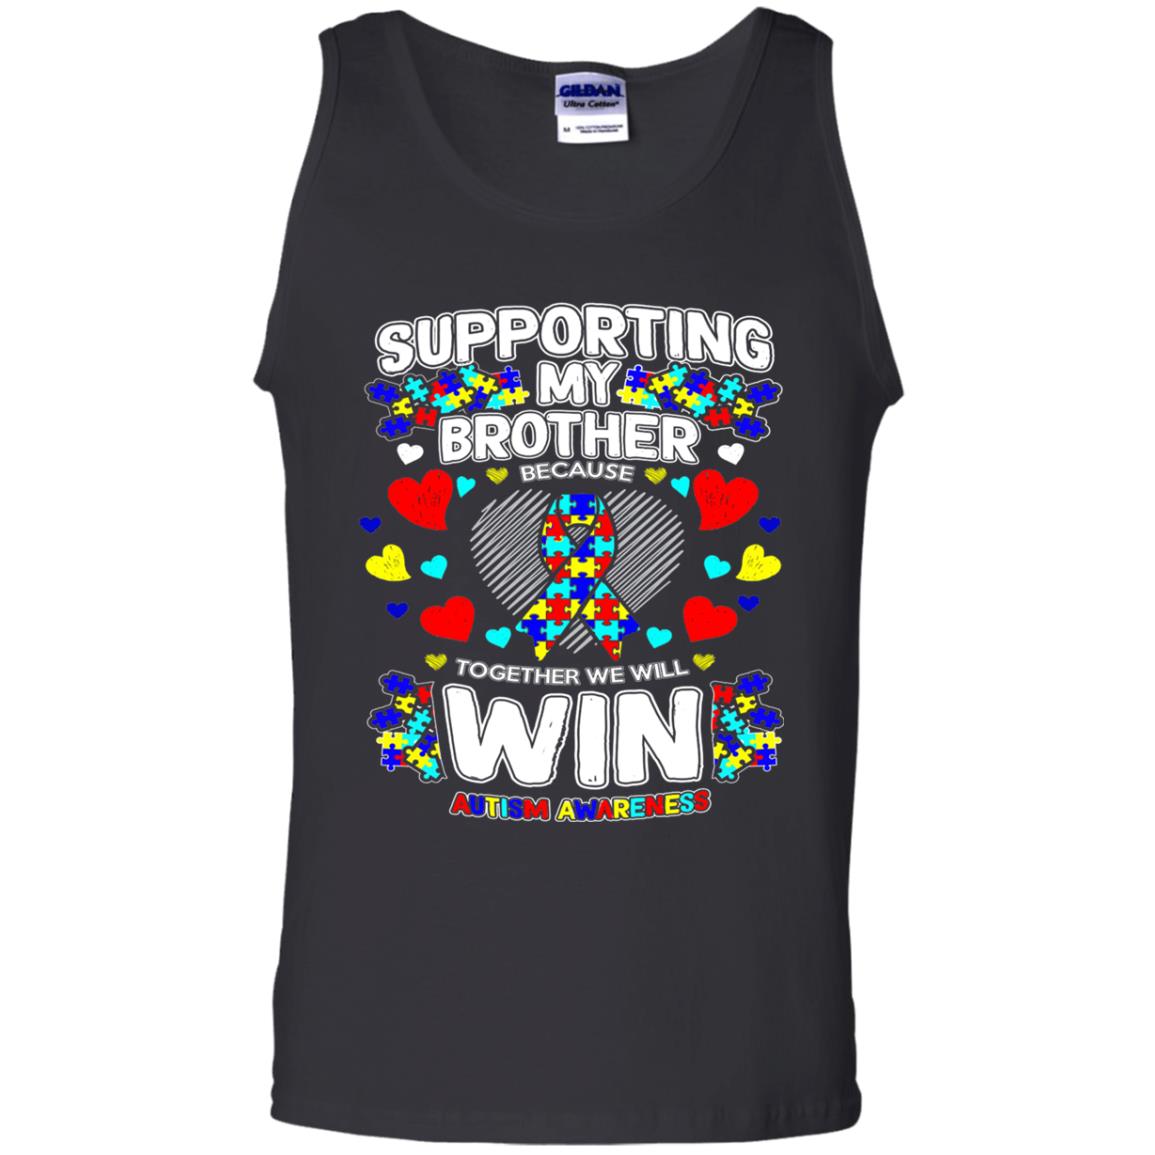 Autism Awareness Shirts For Supporting My Brother